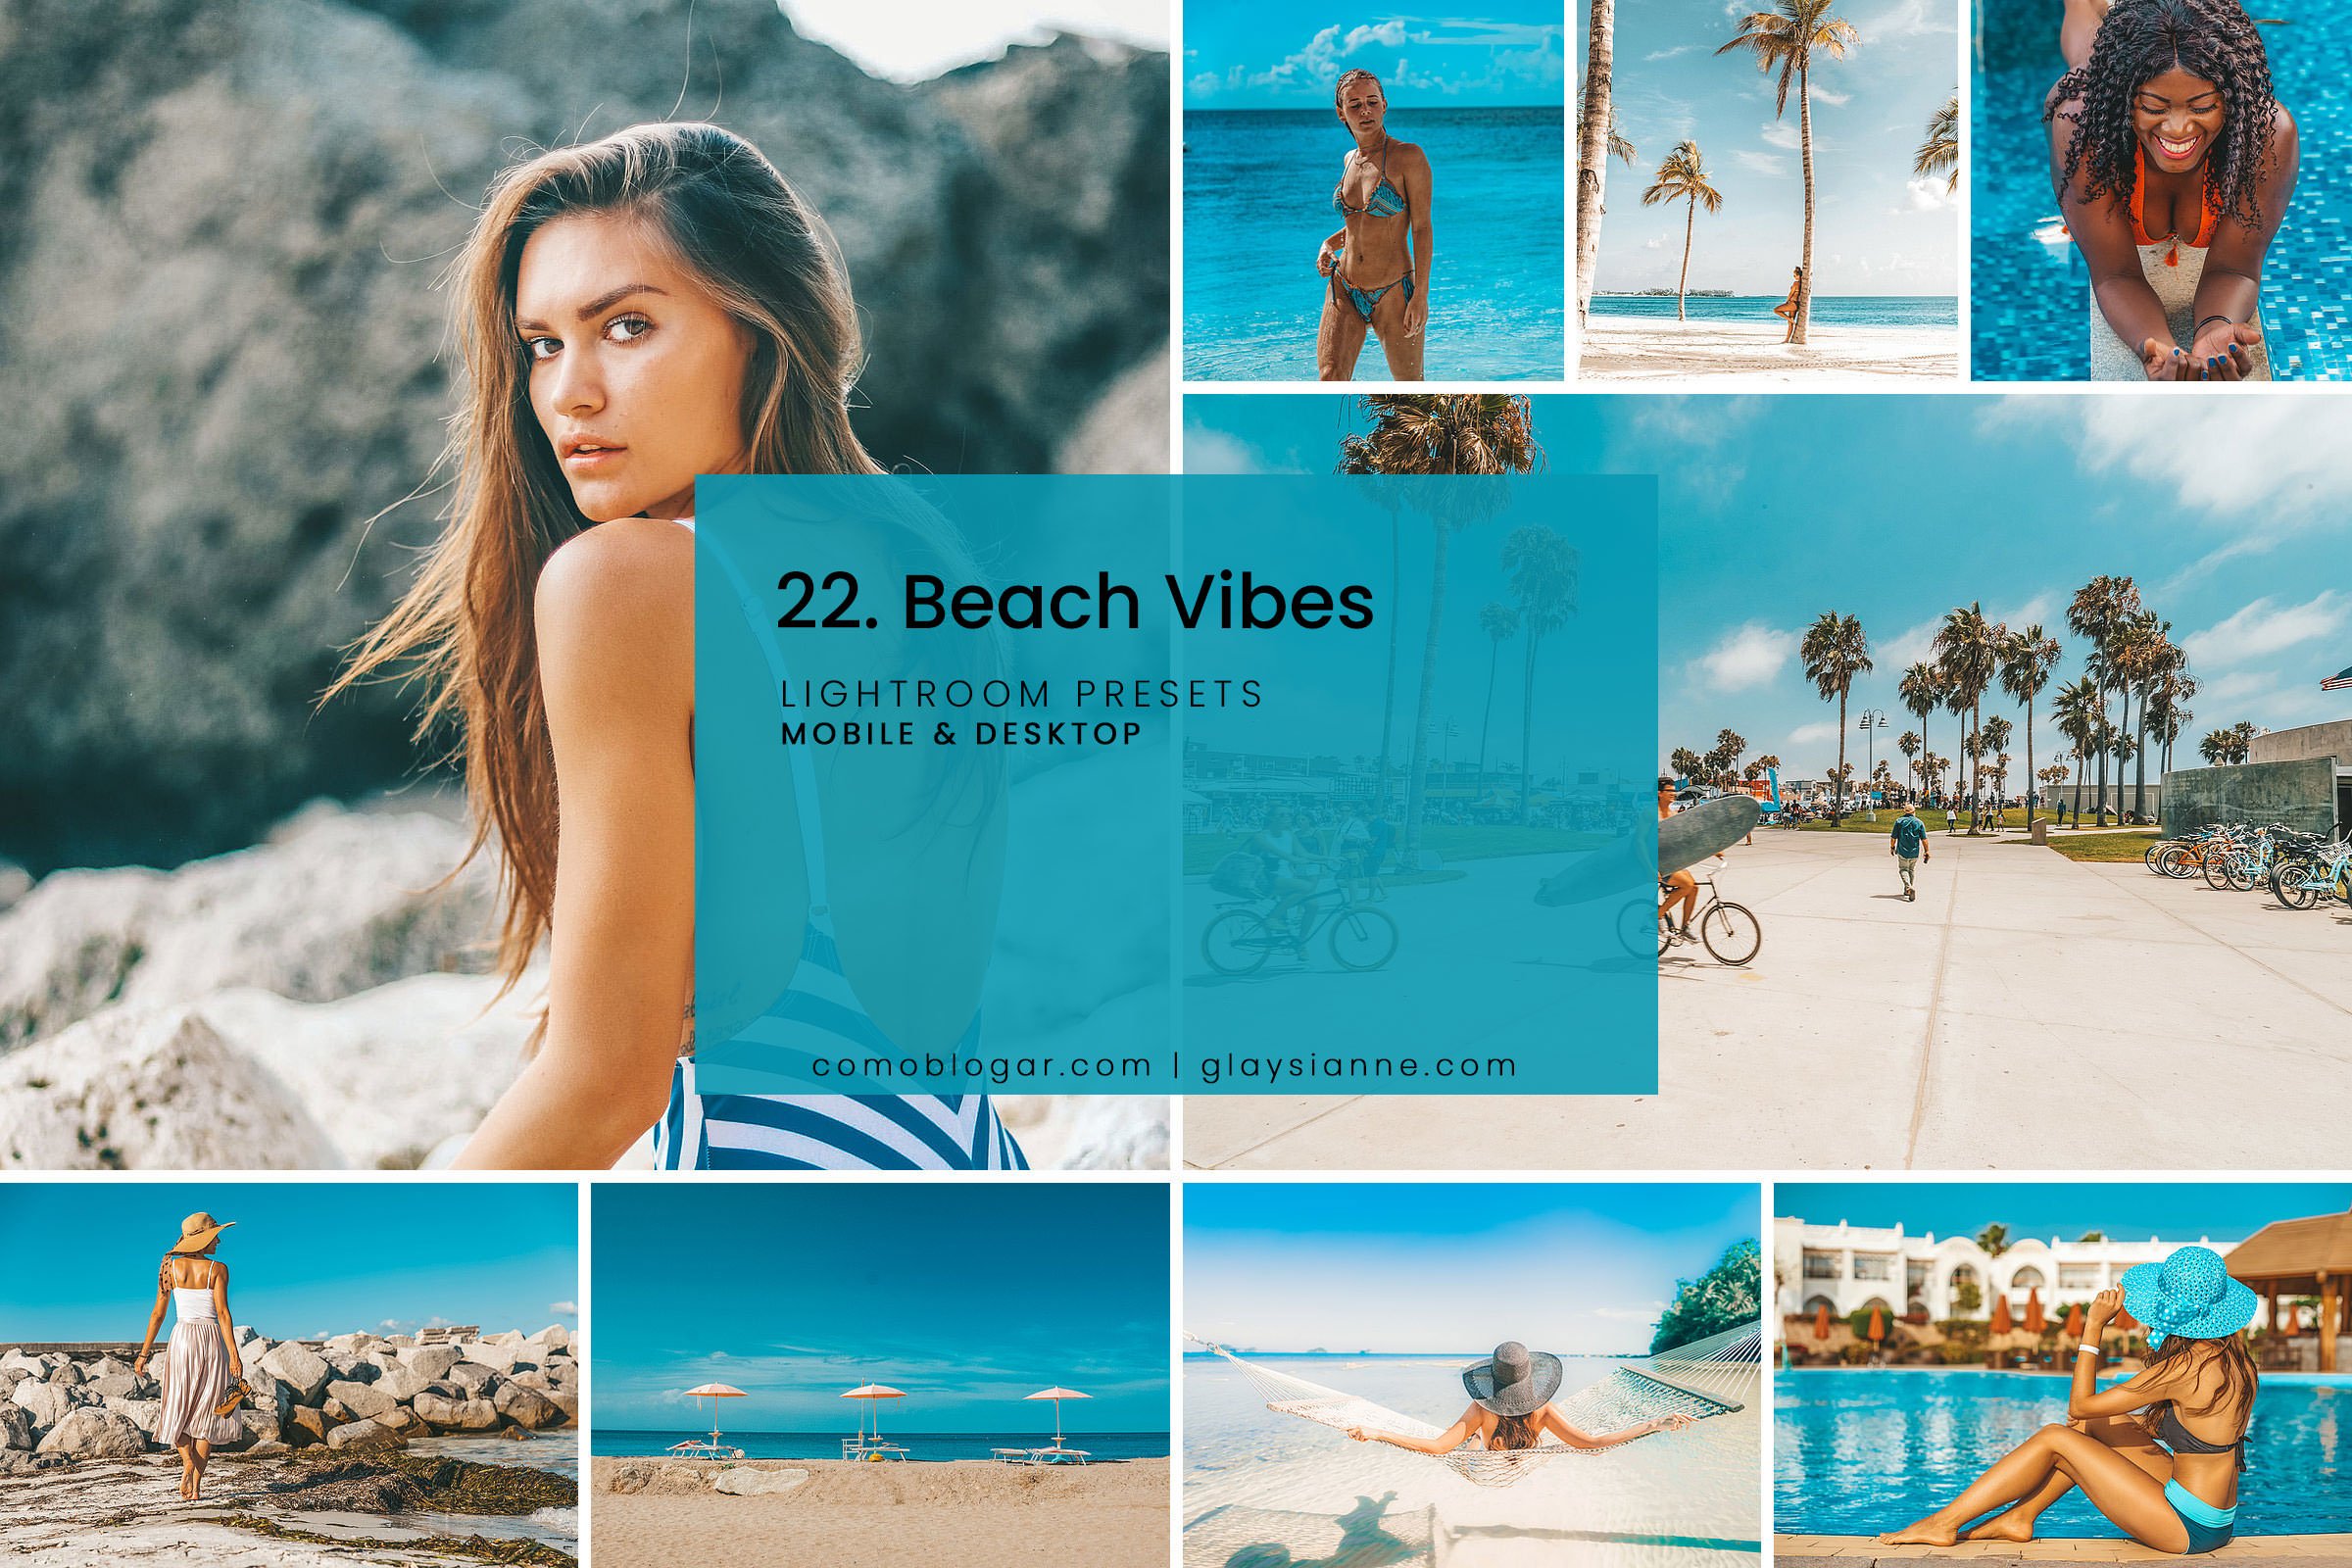 22. Beach Vibes Presetscover image.